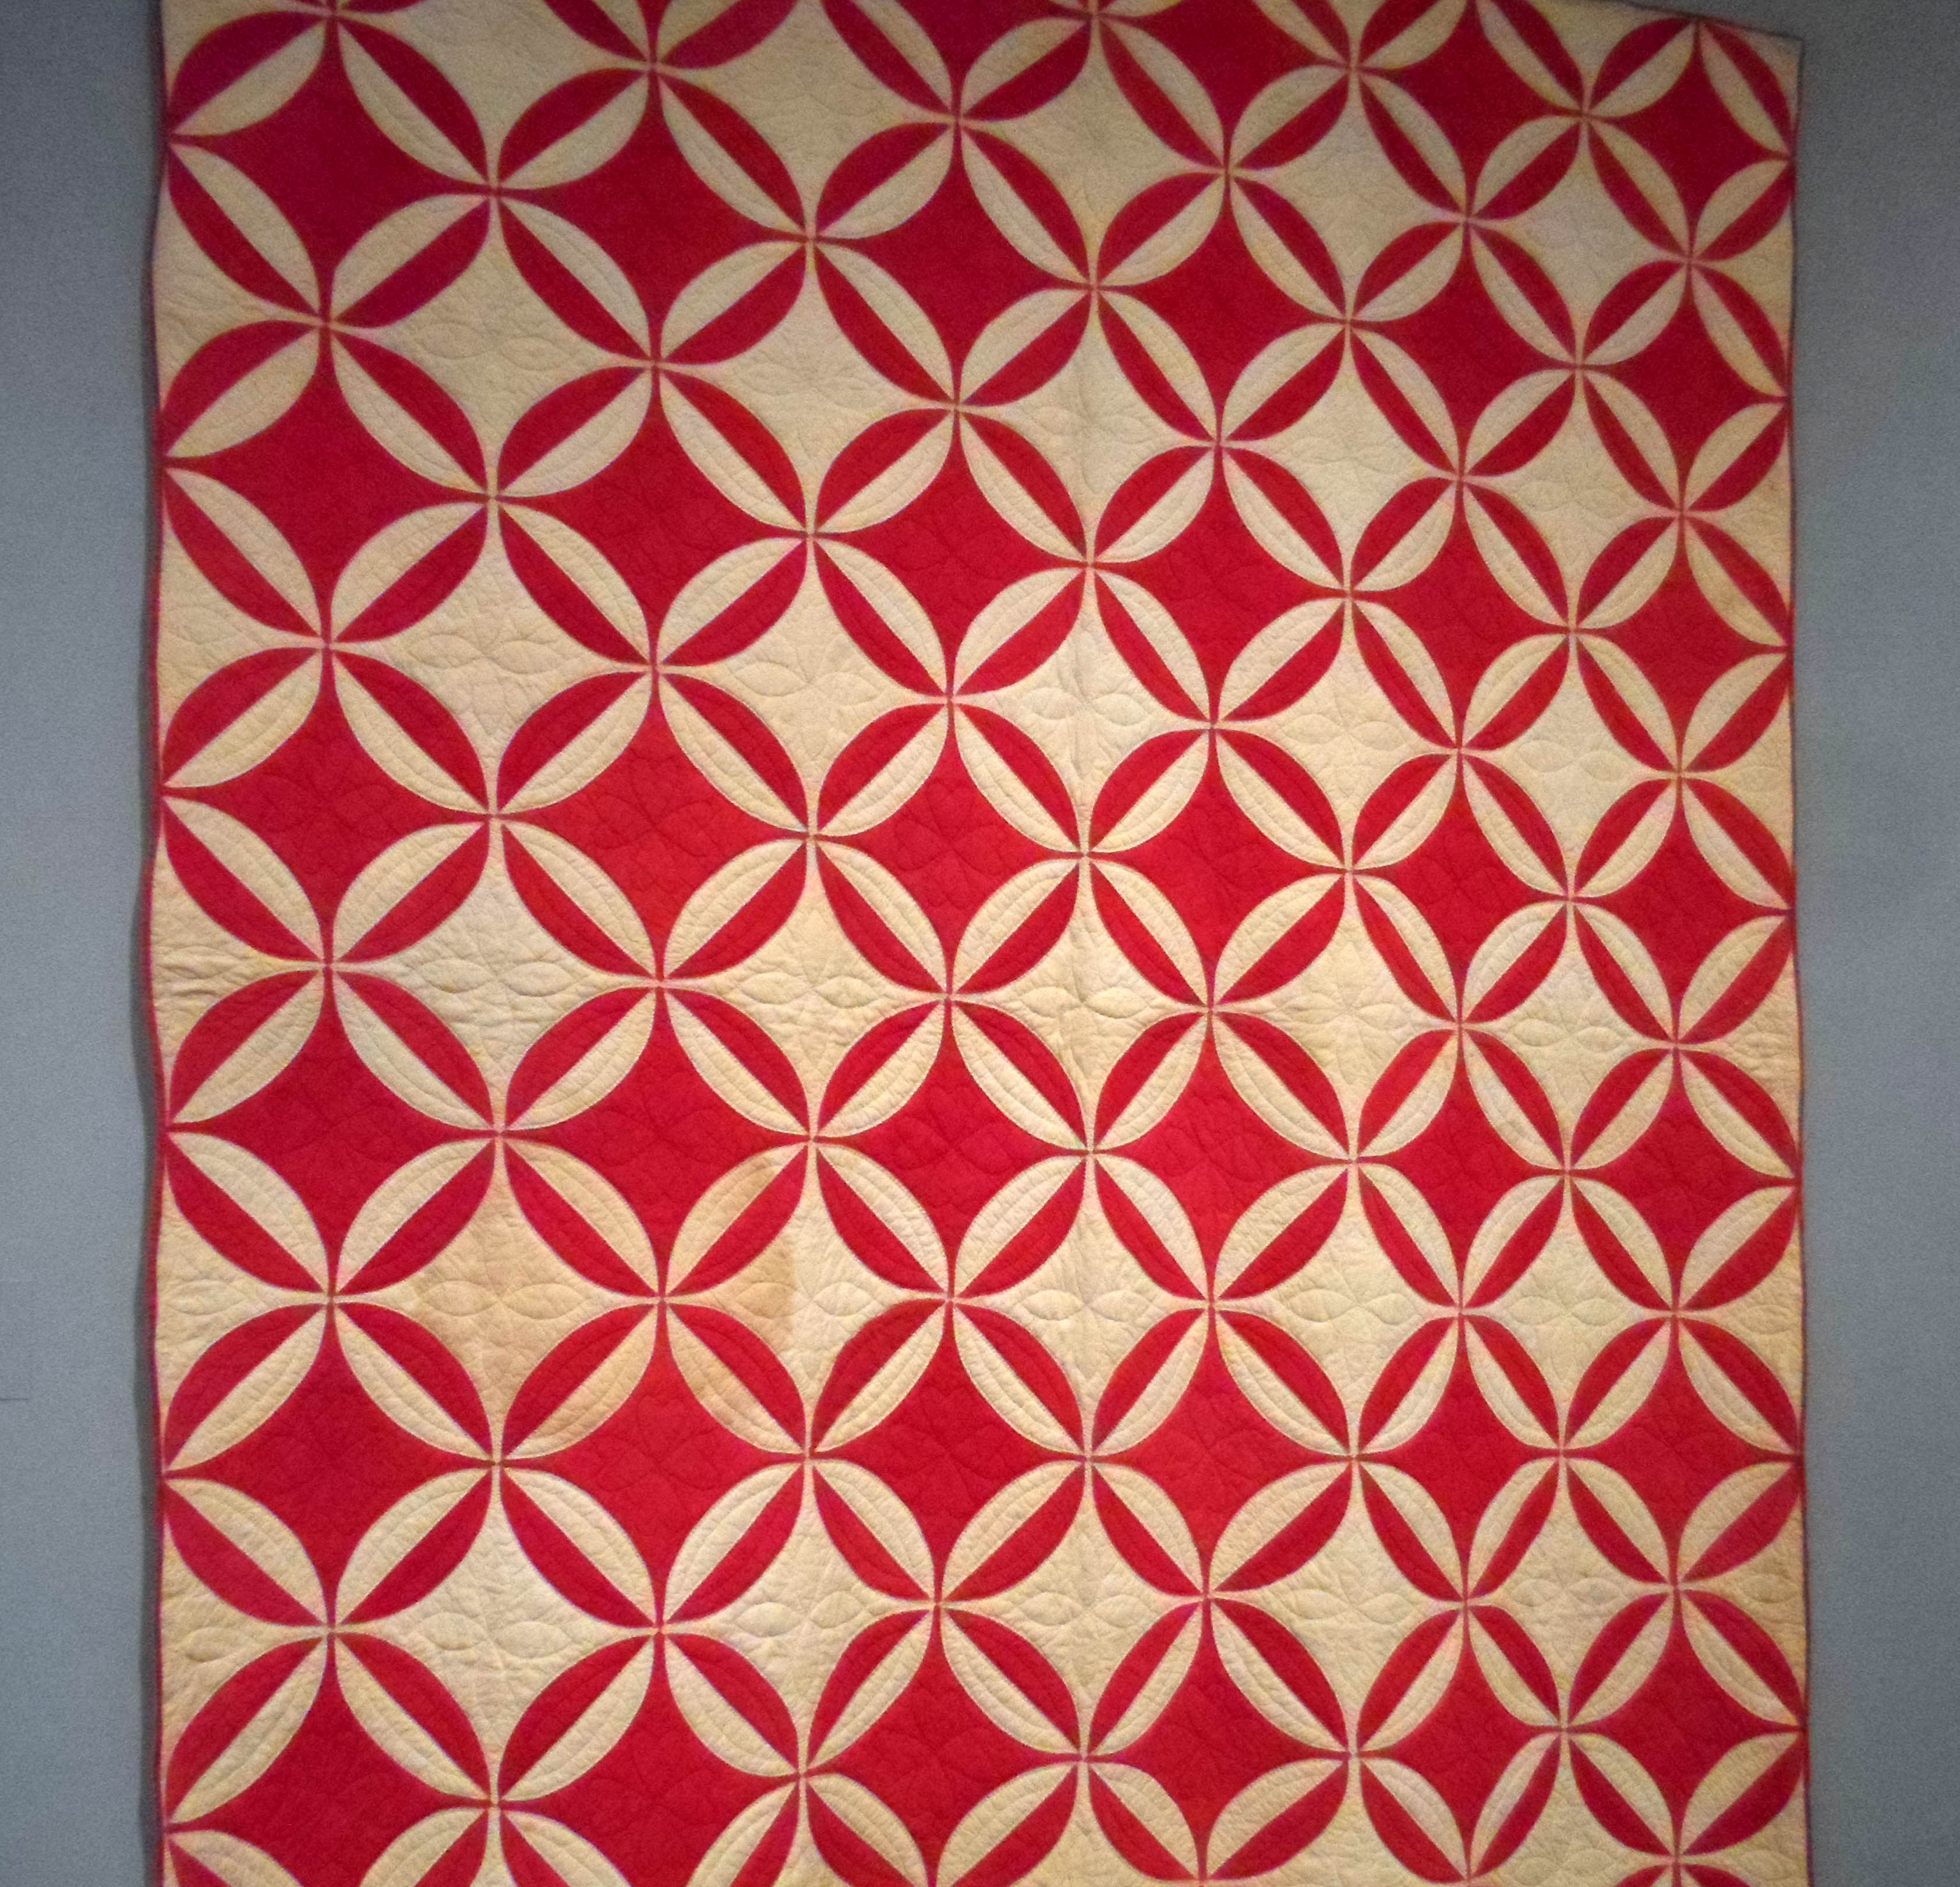 ROBBING PETER TO PAY PAUL QUILT, circa 1850, cotton